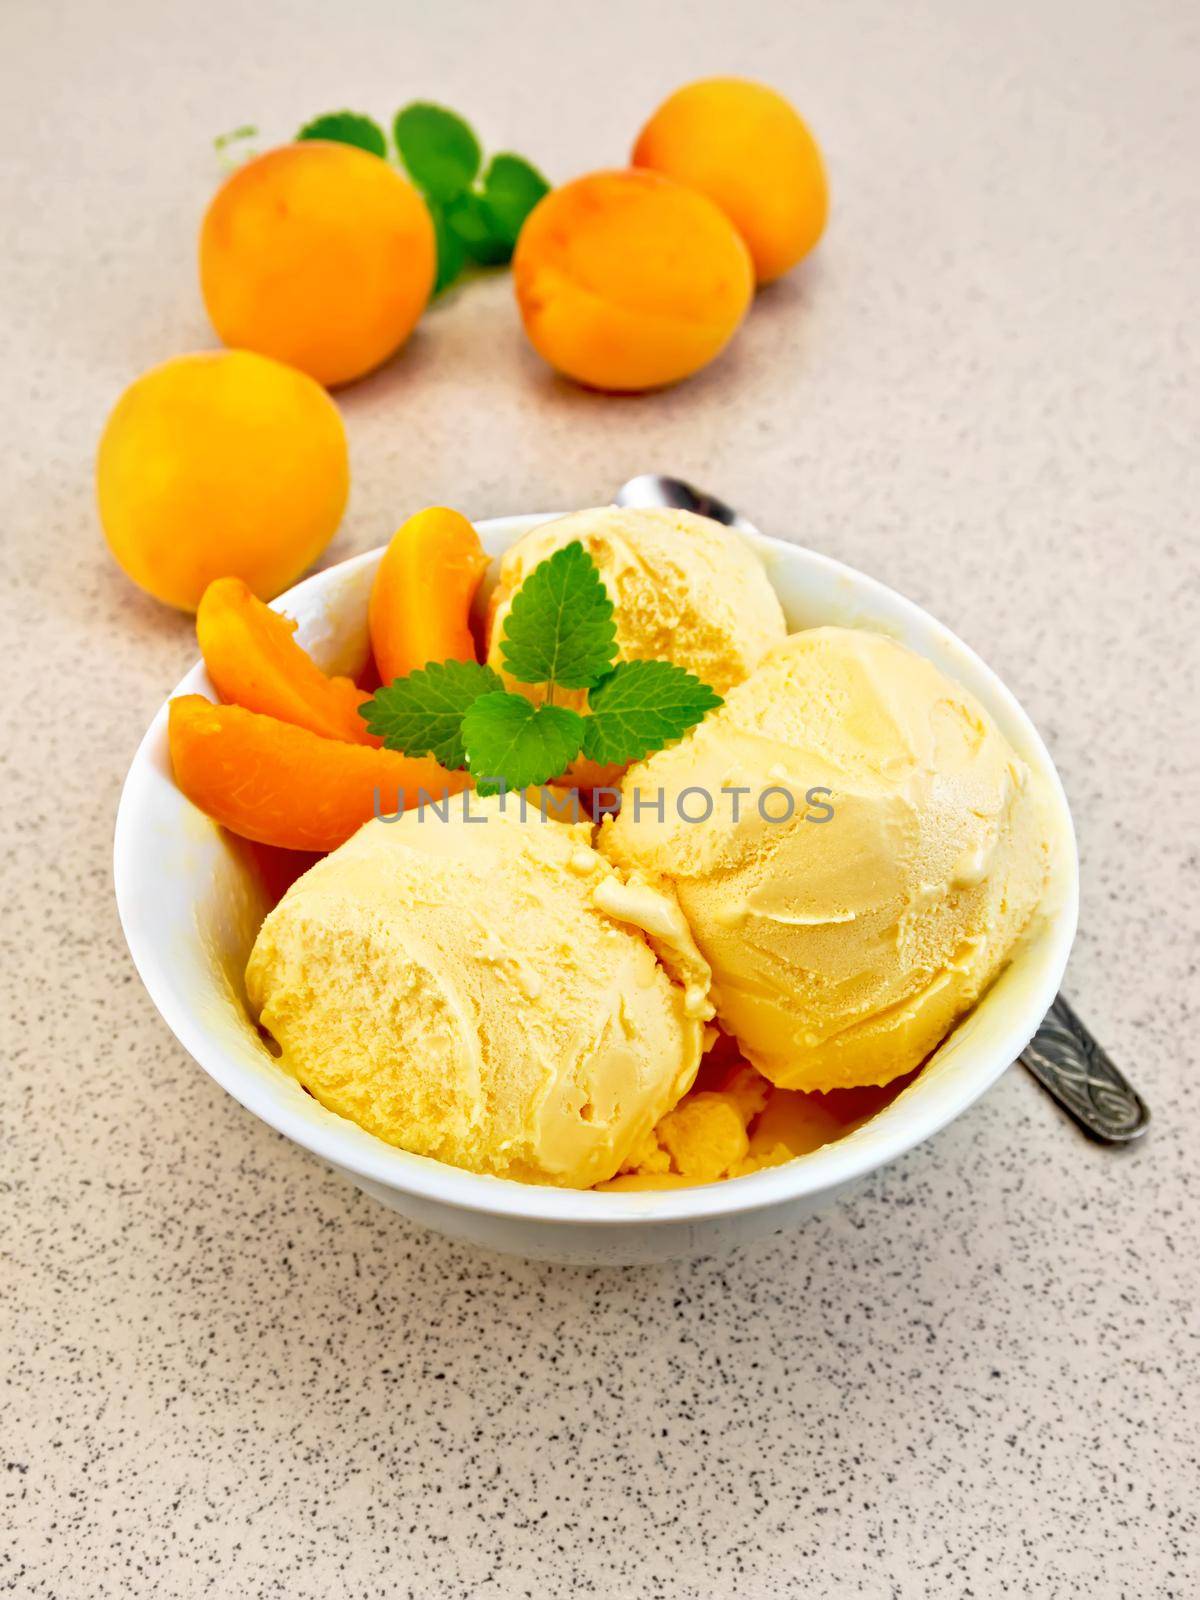 Apricot ice cream in a white bowl with slices of fruit and mint on a background granite table